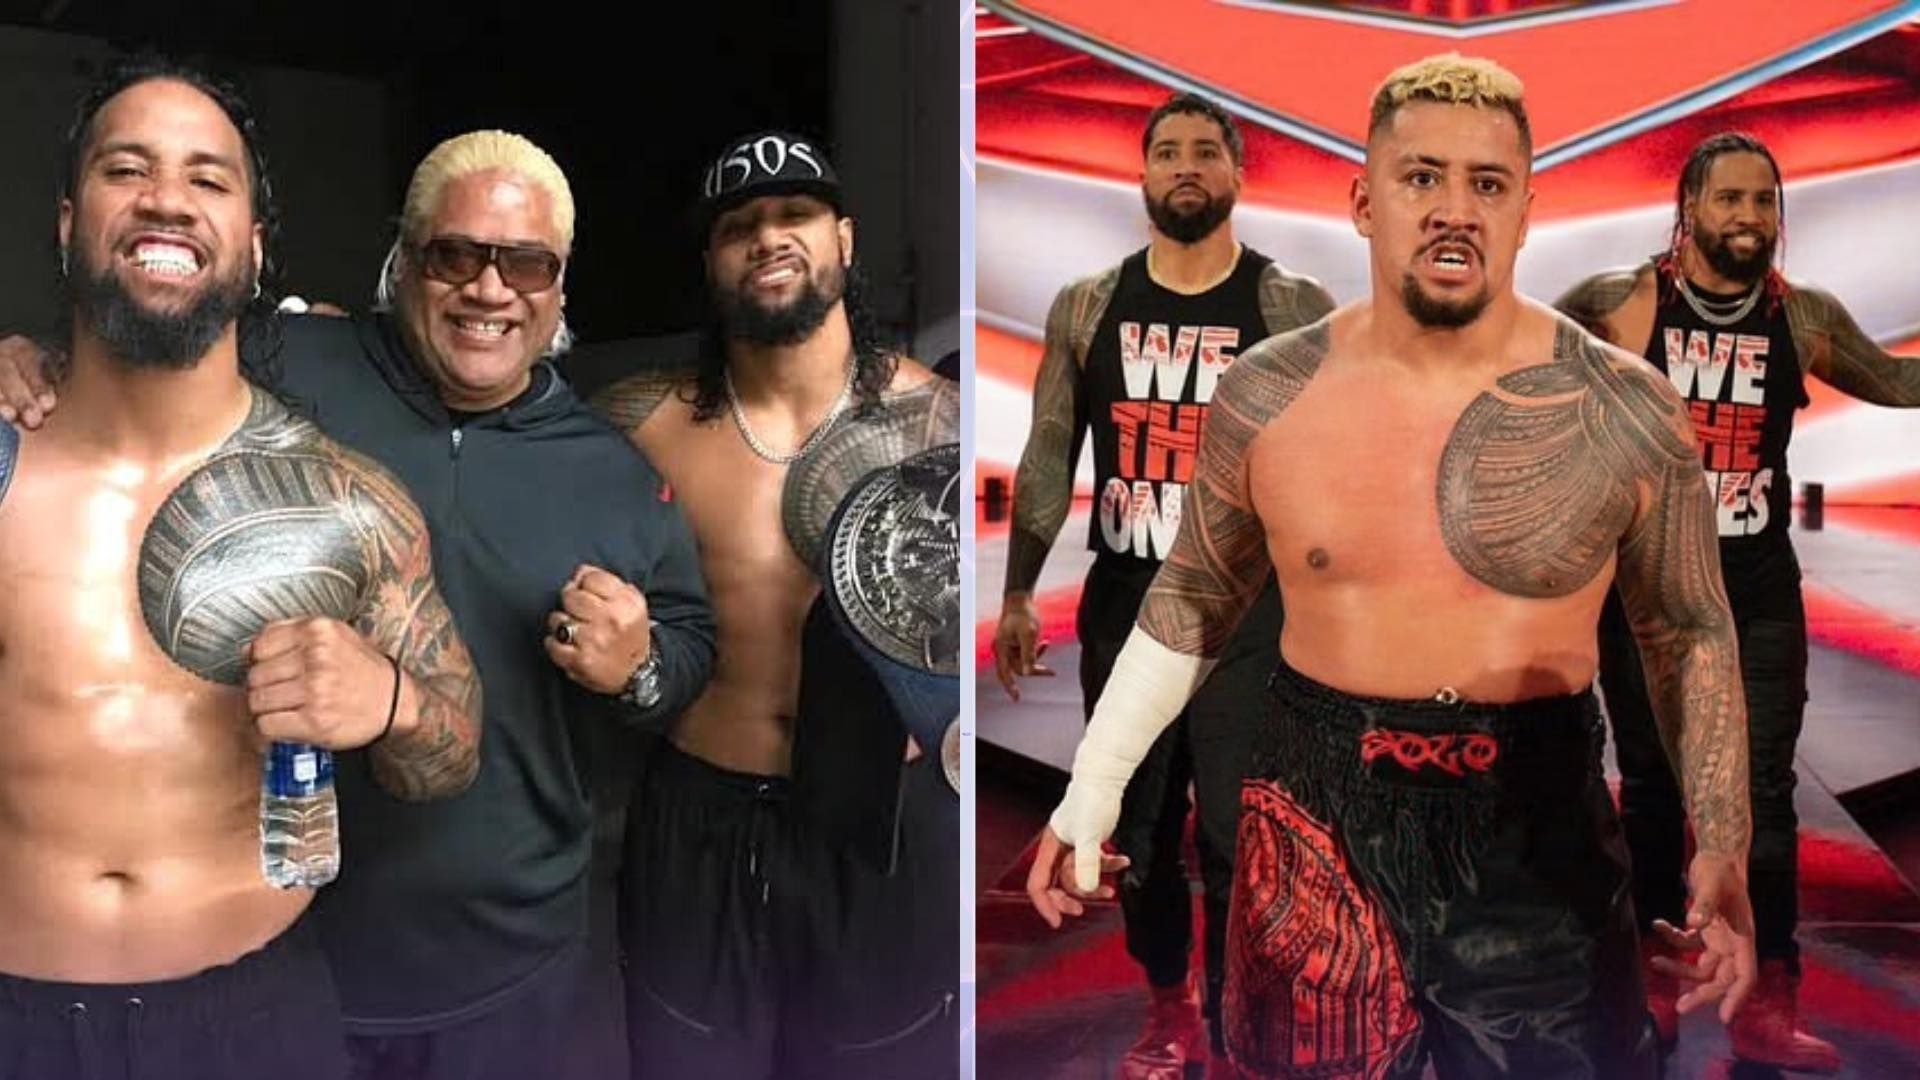 Rikishi is the father of The Usos and Solo Sikoa.